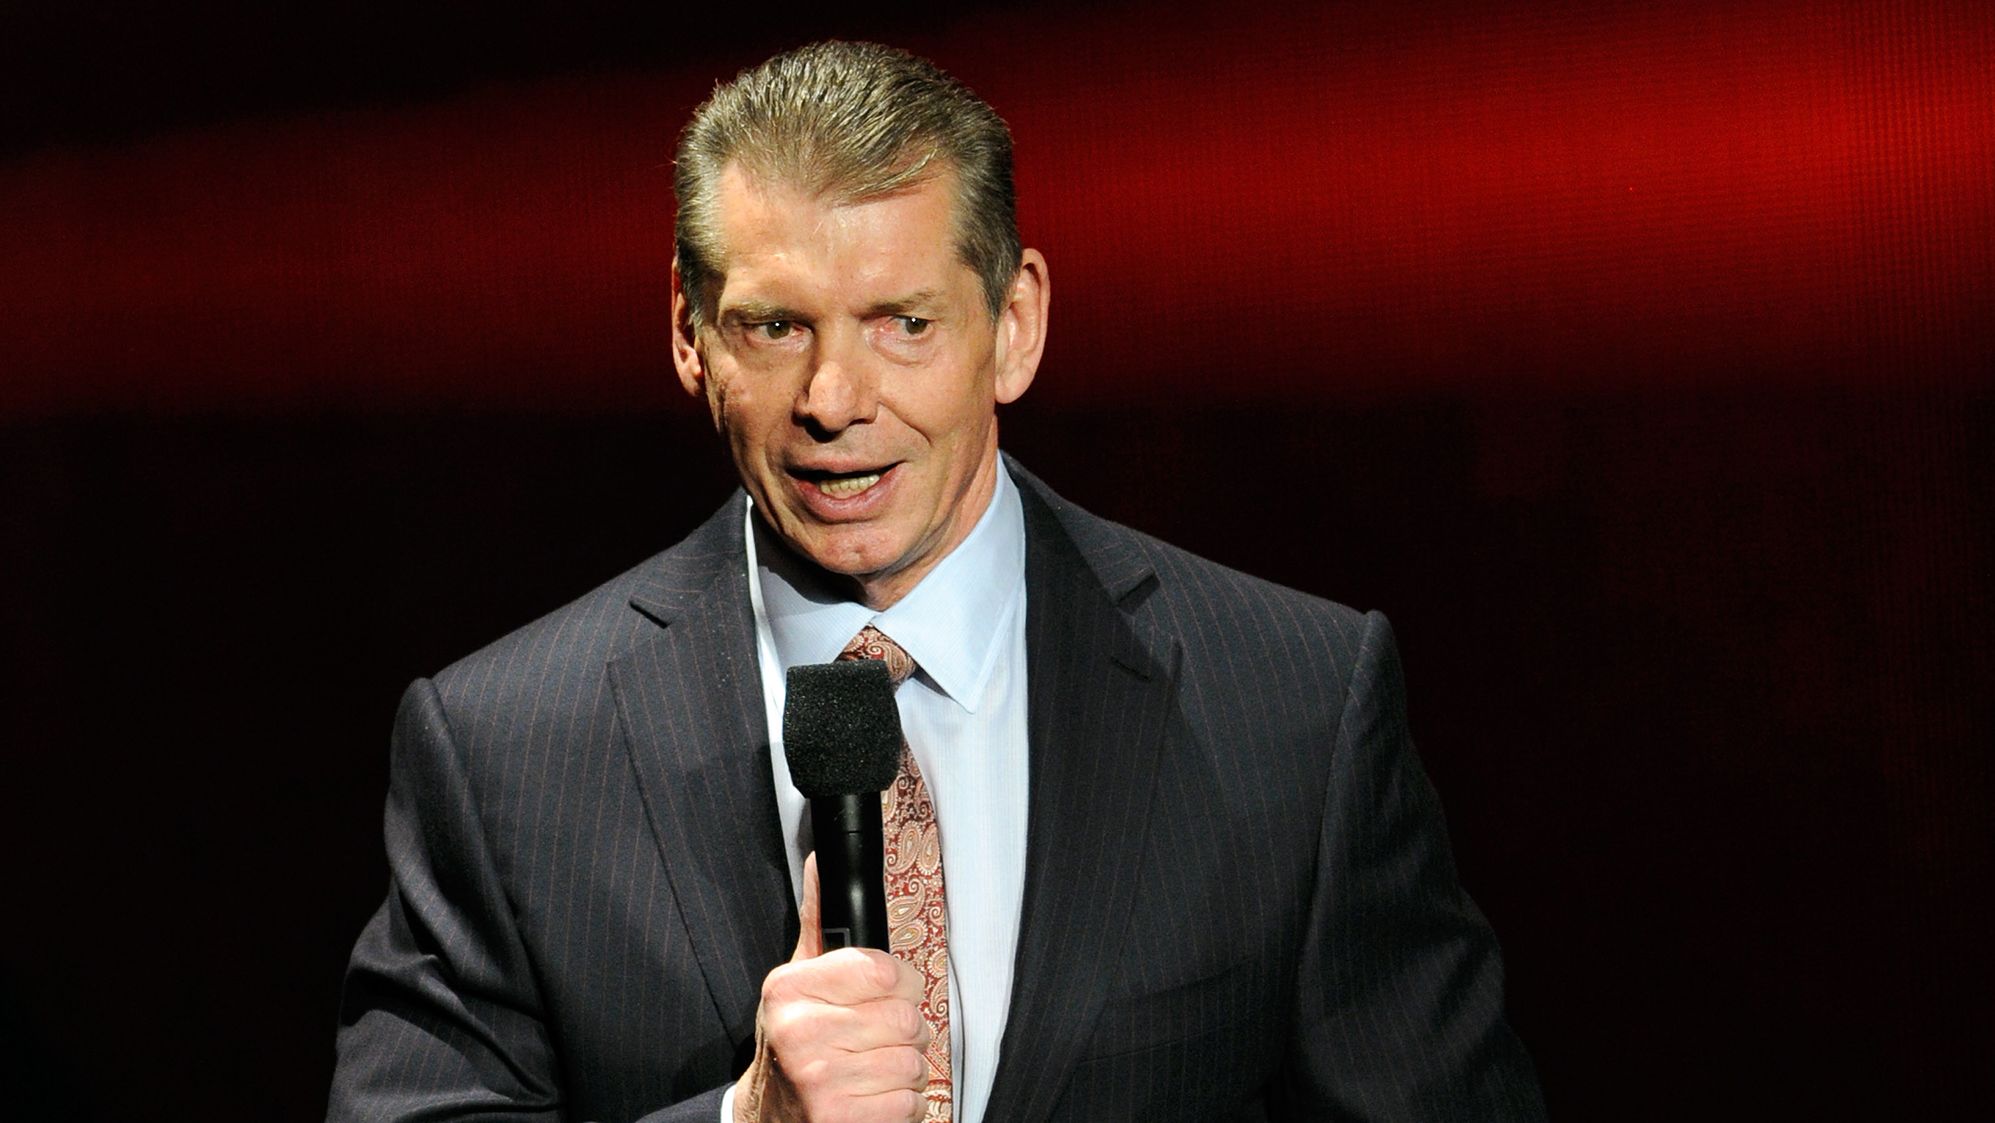 1995px x 1123px - WWE boss Vince McMahon reportedly paid $3 million in hush money to cover up  affair | CNN Business